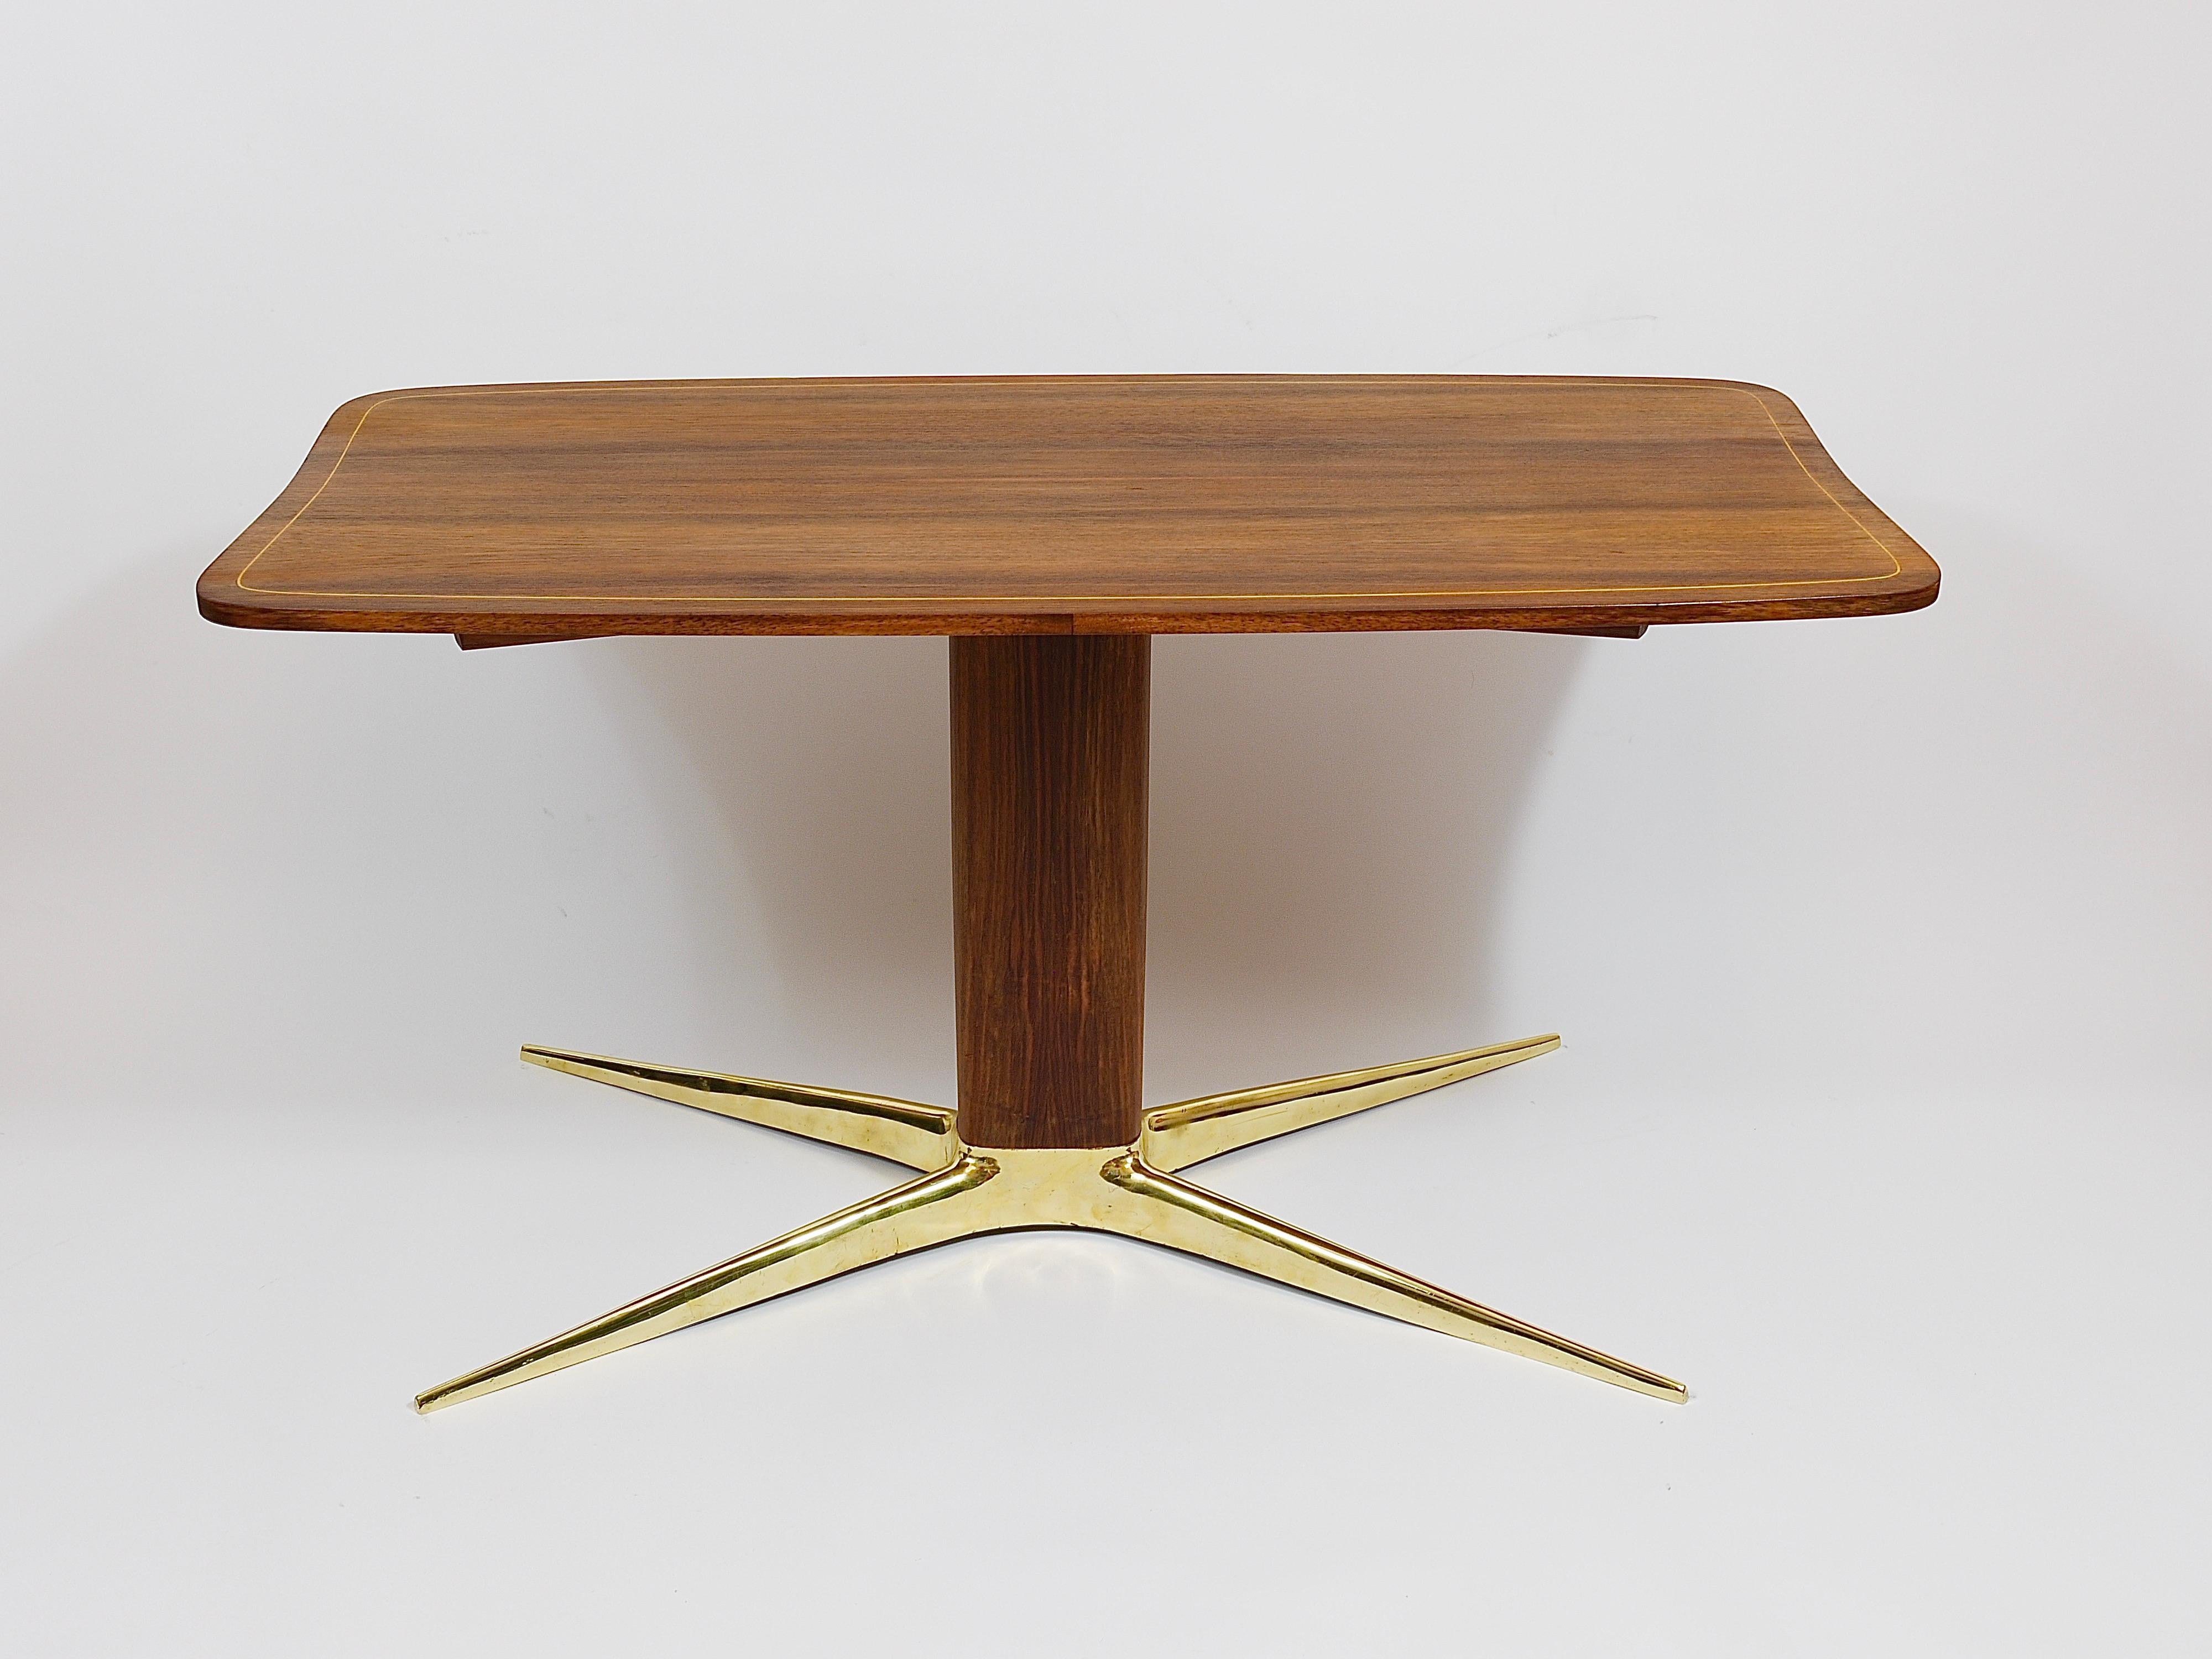 An elegant coffee or sofa table from the 1950s, designed by the Austrian architect and designer Oswald Haerdtl. A beautiful table with a lovely curved top, an oval walnut center stem and the typical, unmistakable X-shaped base, made of polished,